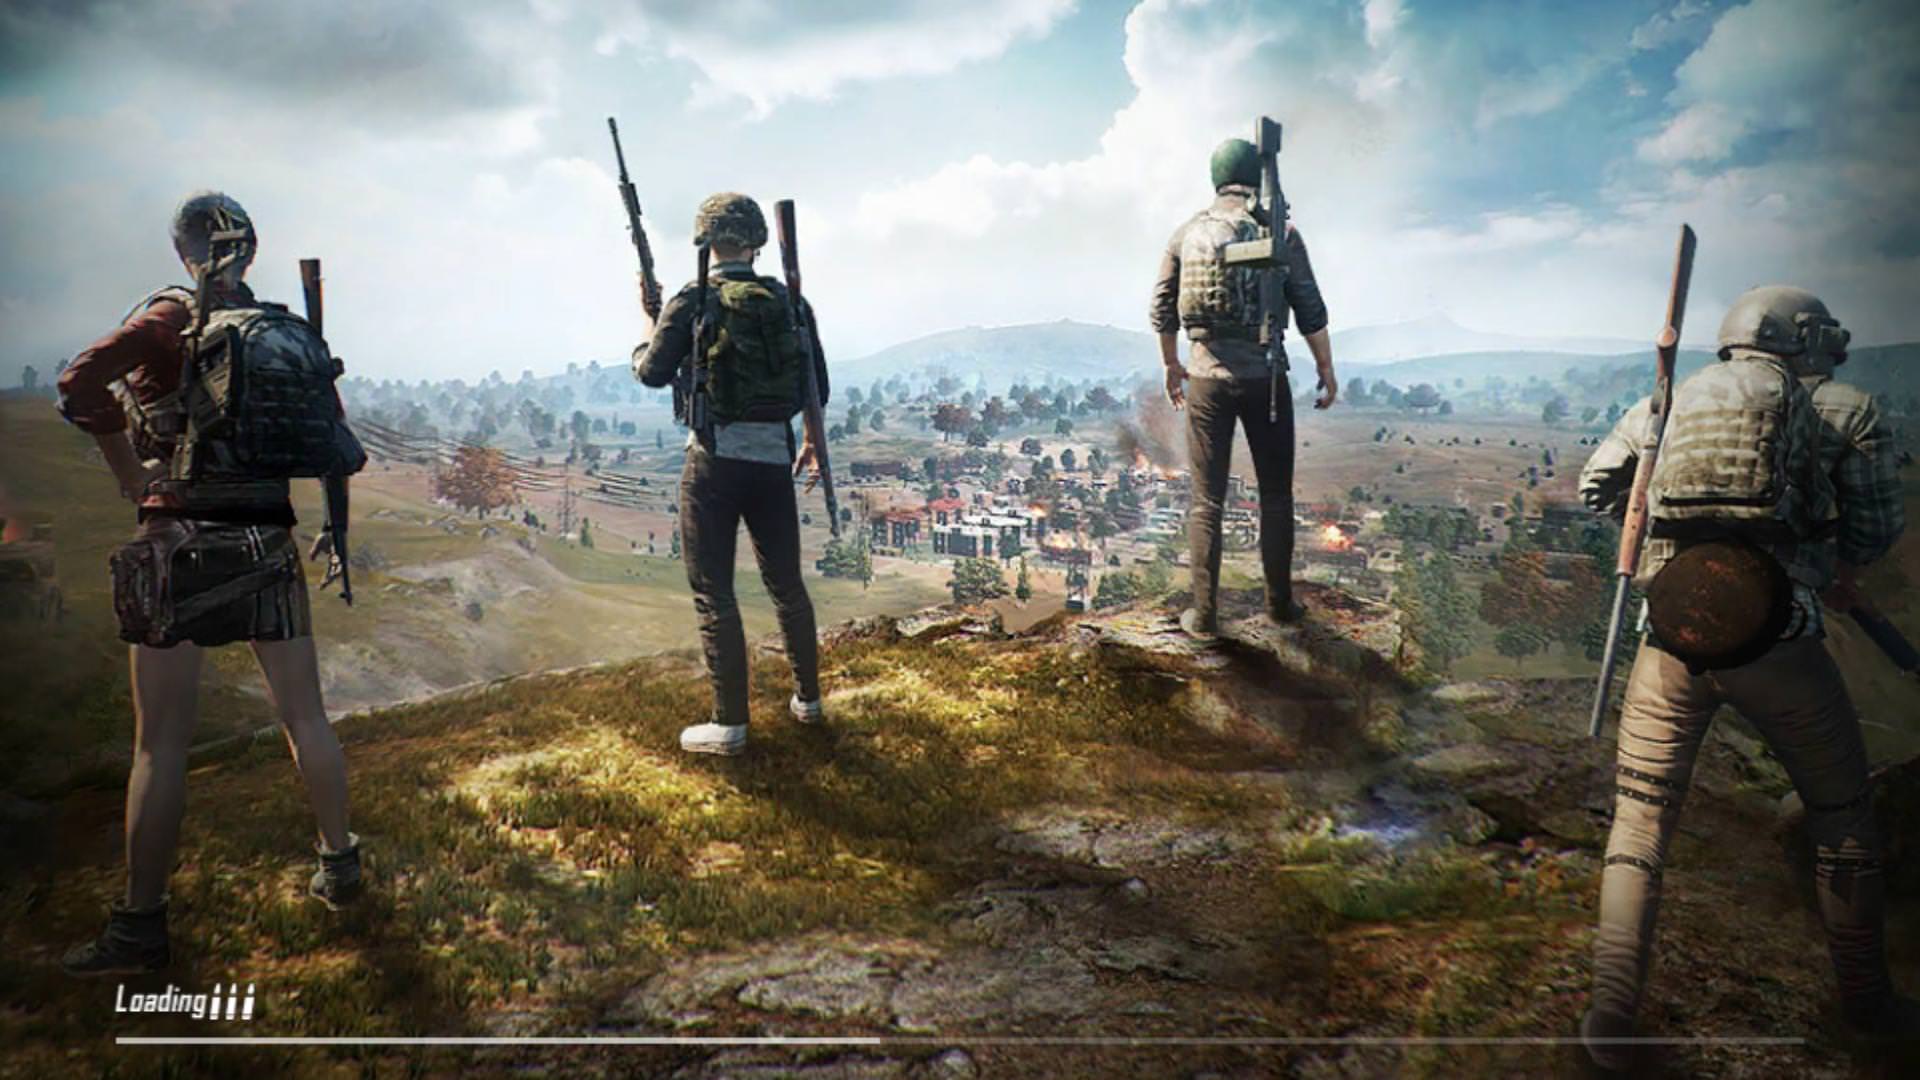 Some of the cool loading screens from the different PUBG